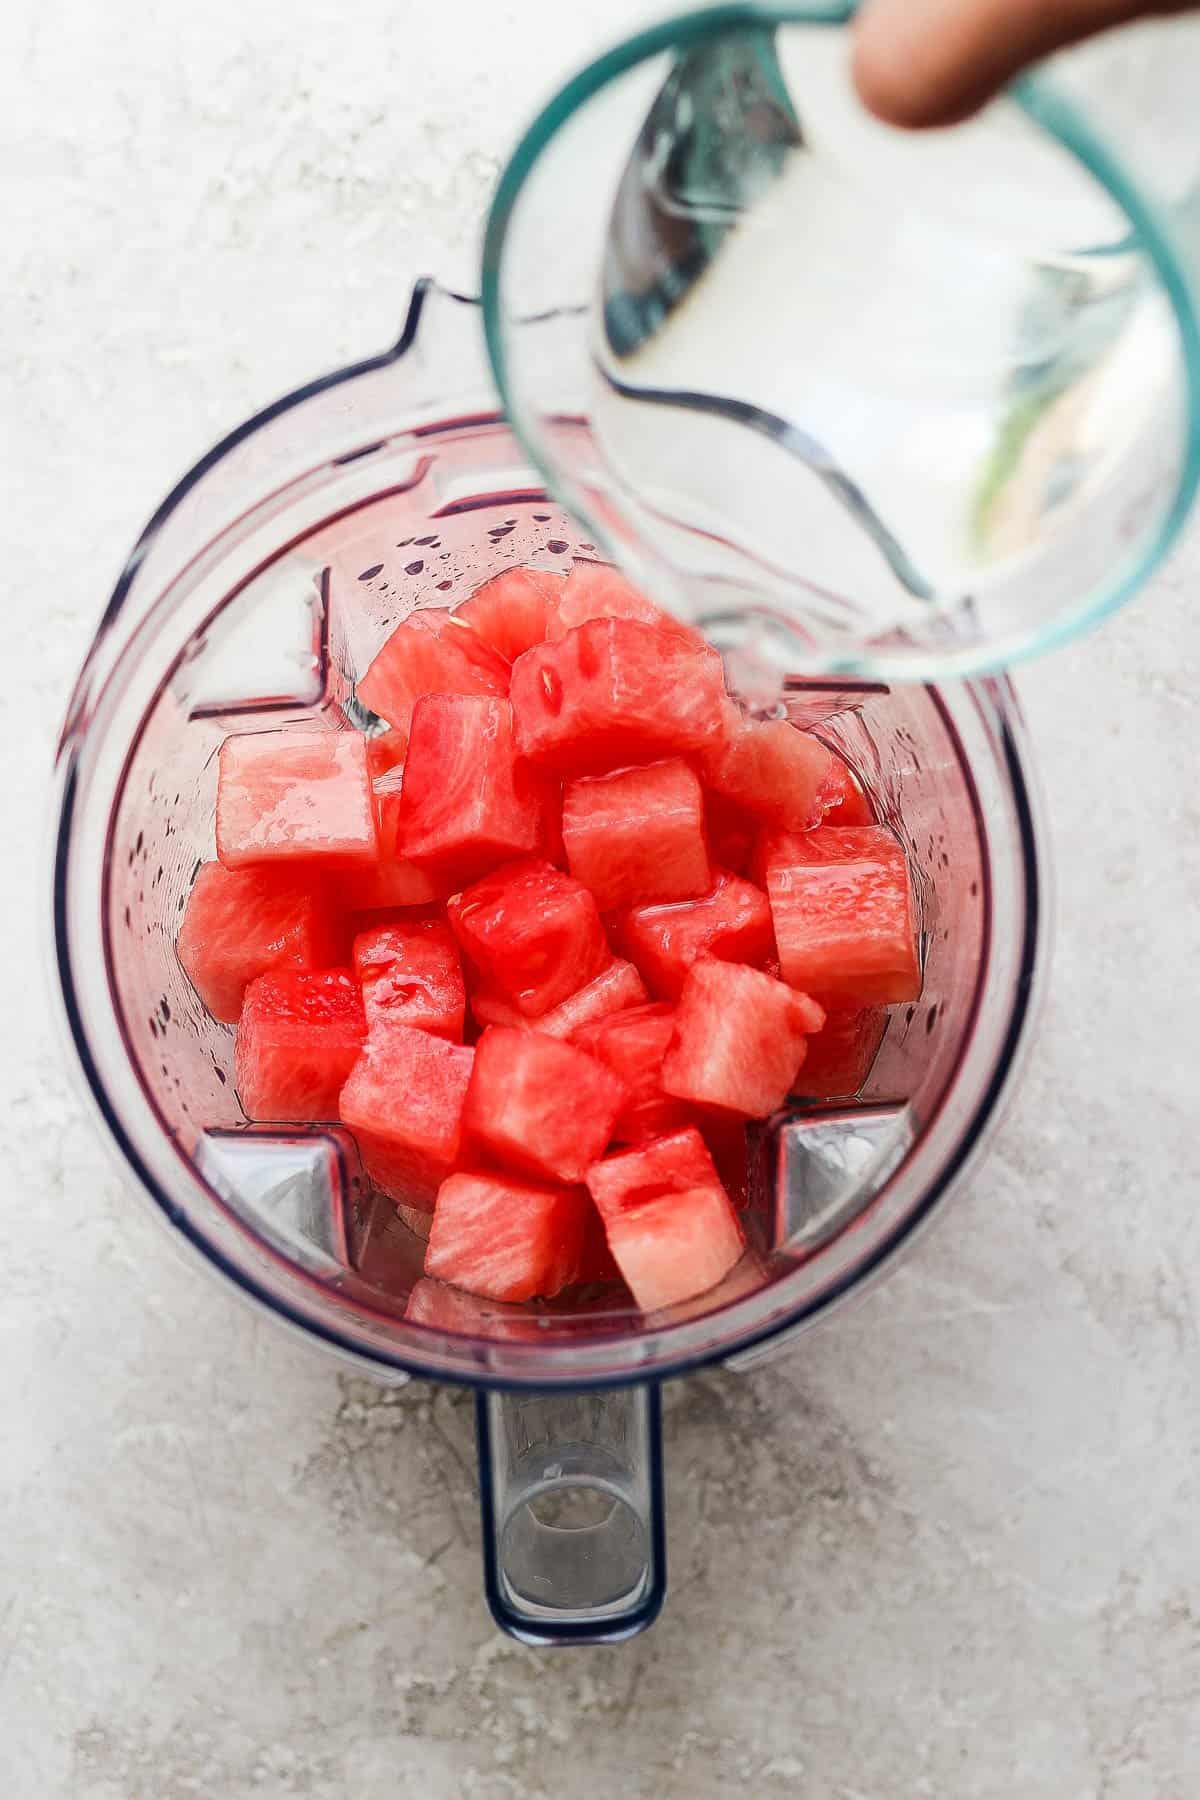 Water being poured into a blender with diced watermelon in it.